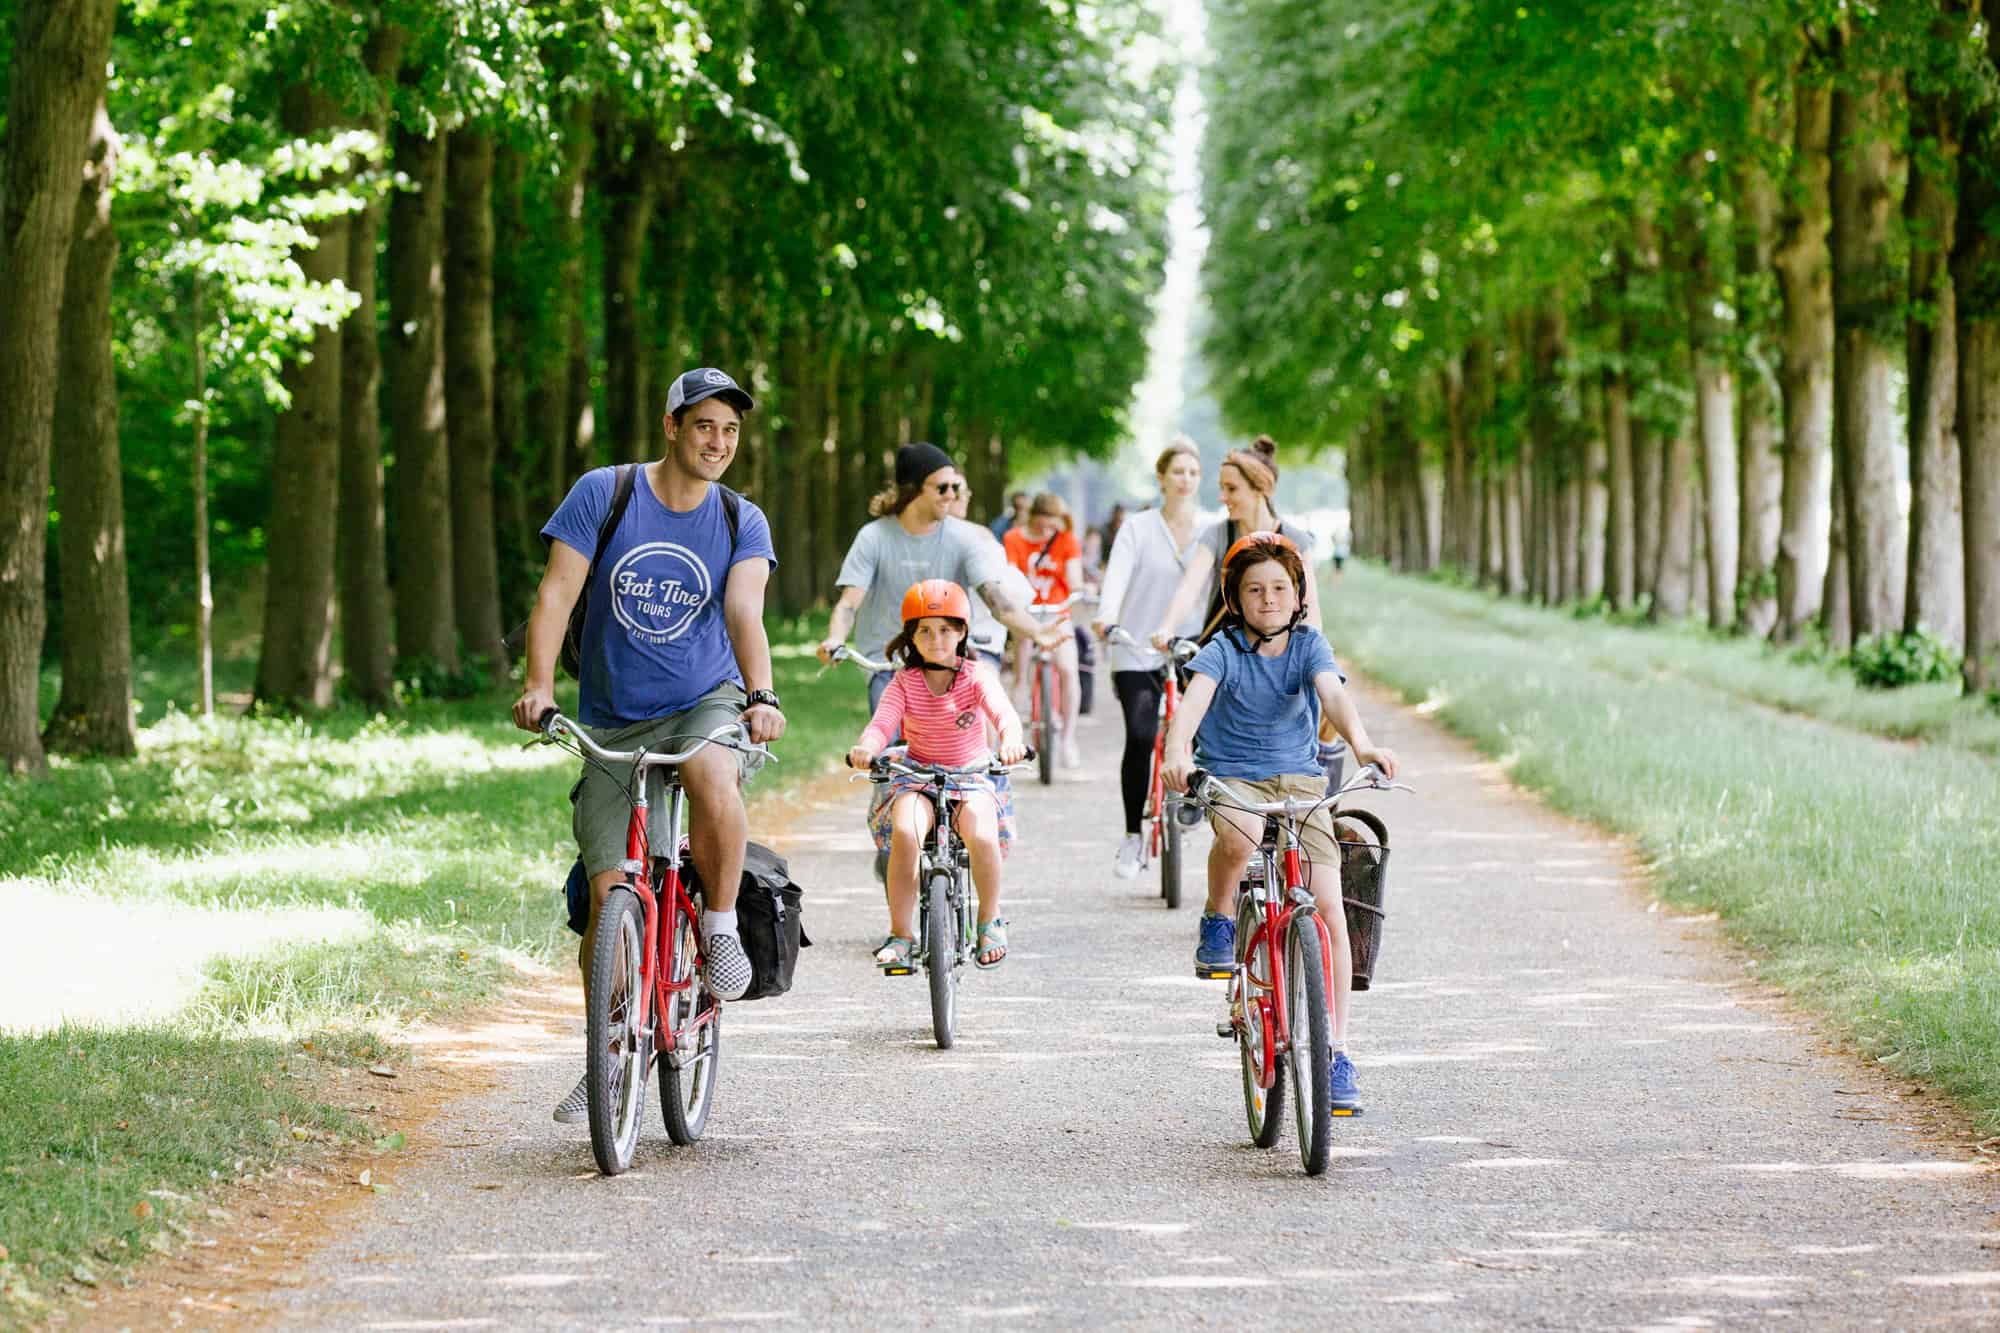 Two children ride at the front of the group alongside the guide during the Versailles Bike Tour.